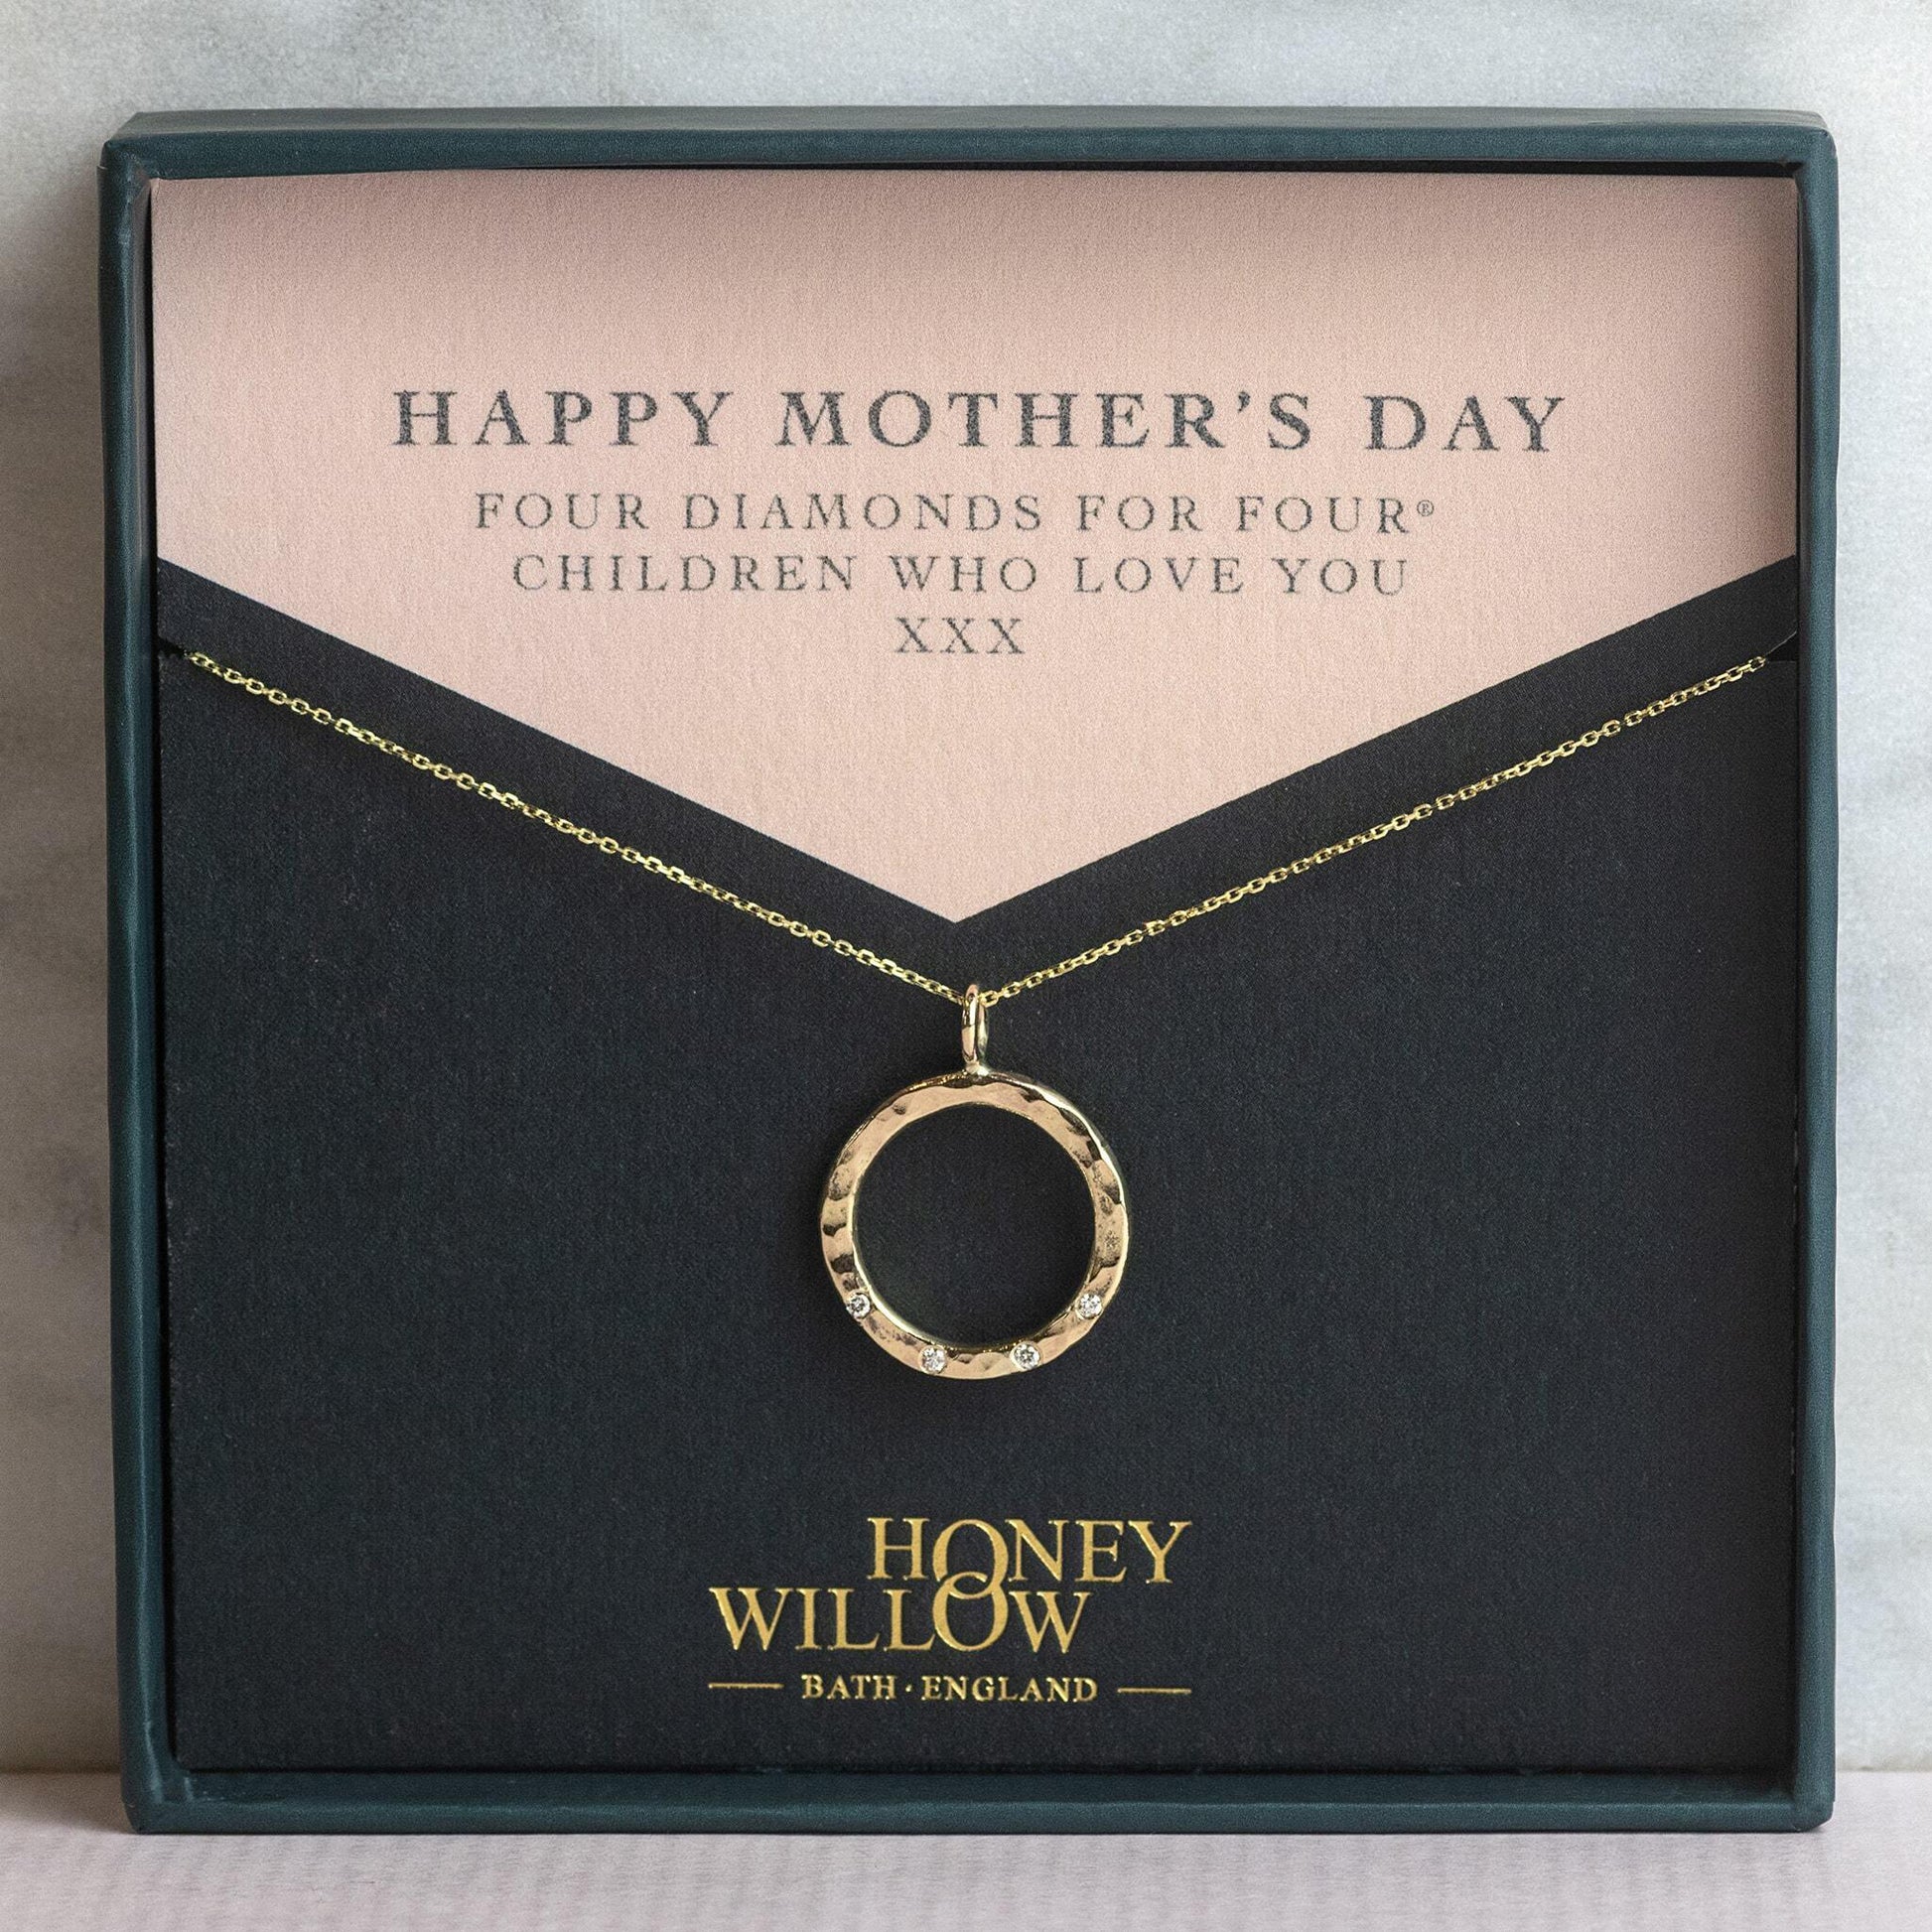 Mother's Day Gift - Recycled 9kt Gold Diamond Halo Necklace - 4 Diamonds for 4® Children